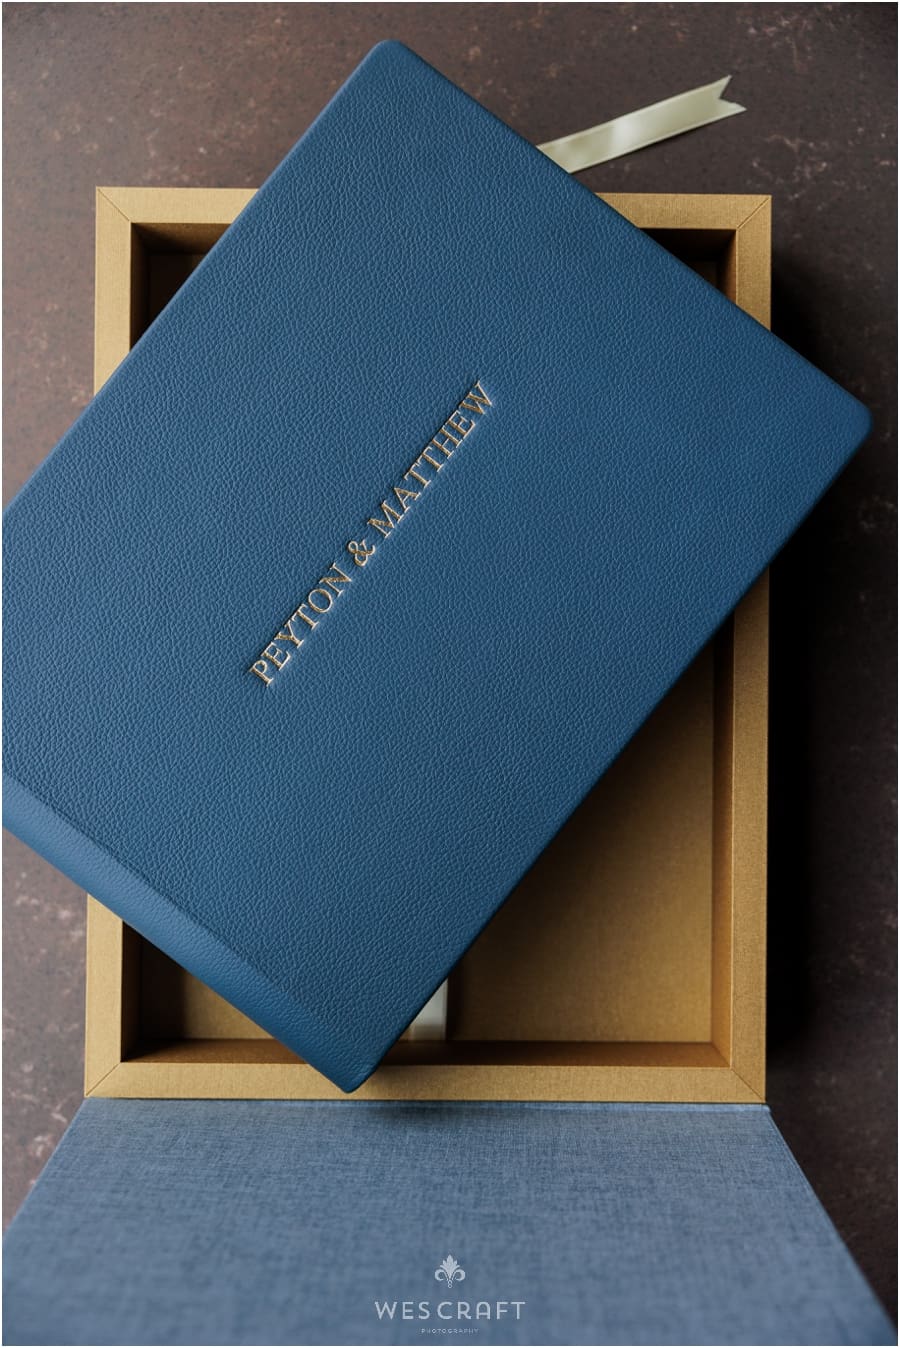 A Navy Blue Leather Album rests in a two toned Gold and blue case.